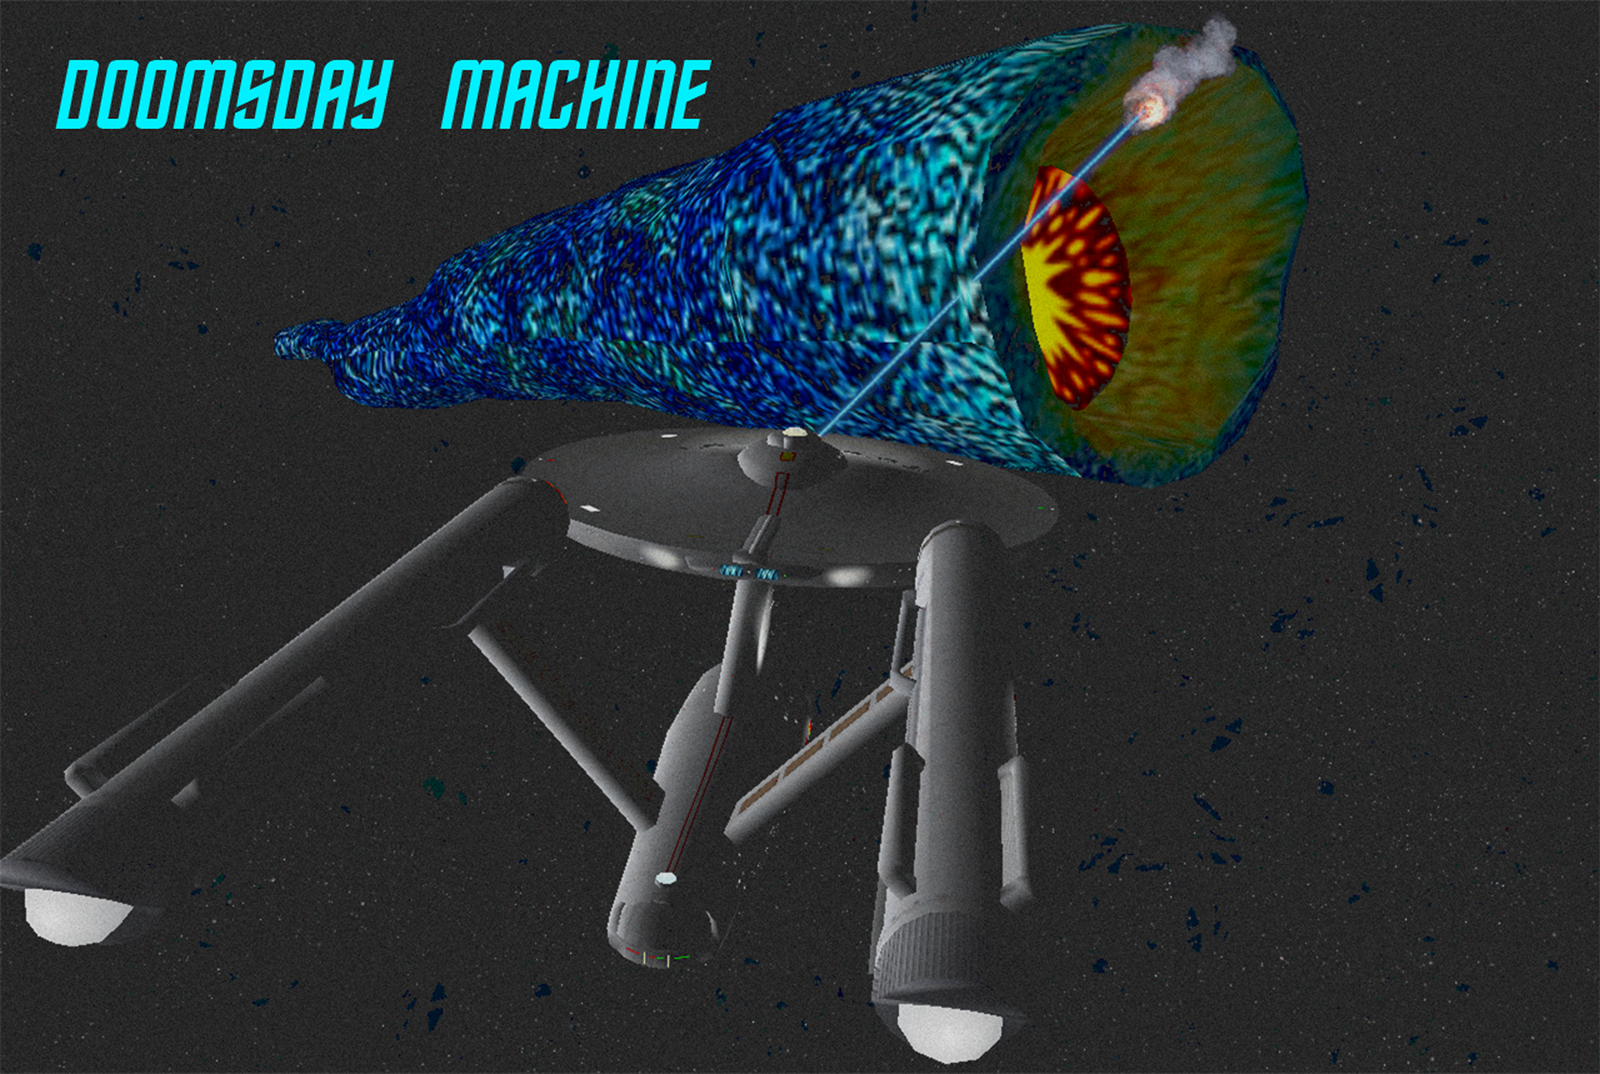 doomsday_machine_by_darthassassin-d5enhro.png